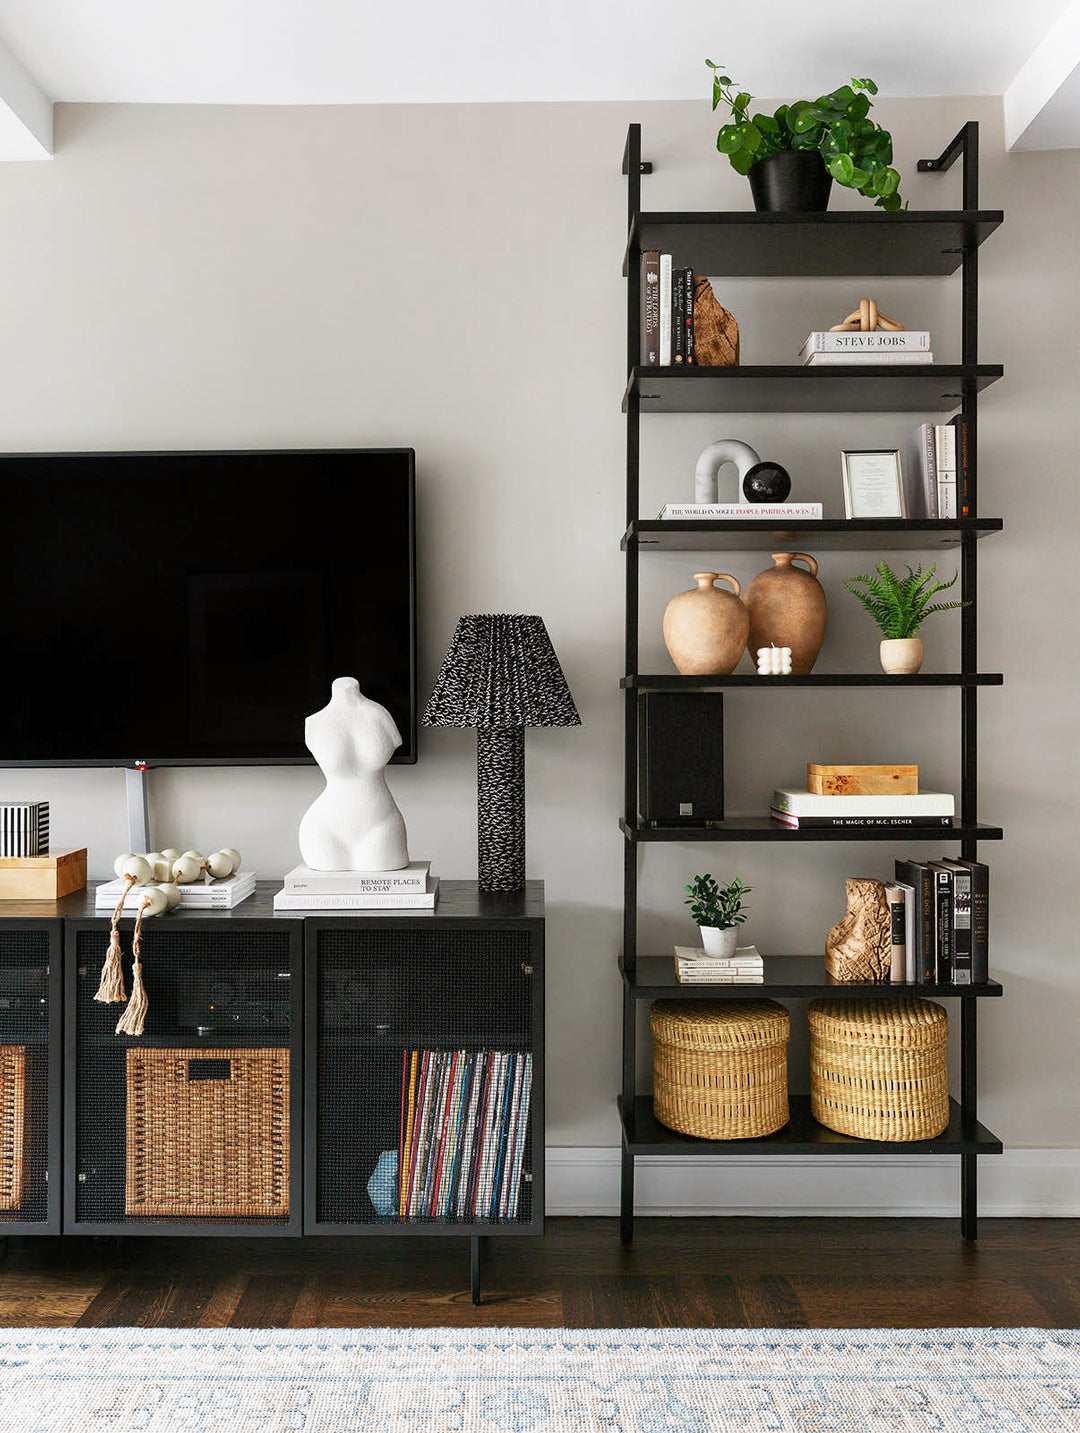 Dark woods and black framed shelving stand out against the Classic light beige painted walls in this living room with a neutral color palette.